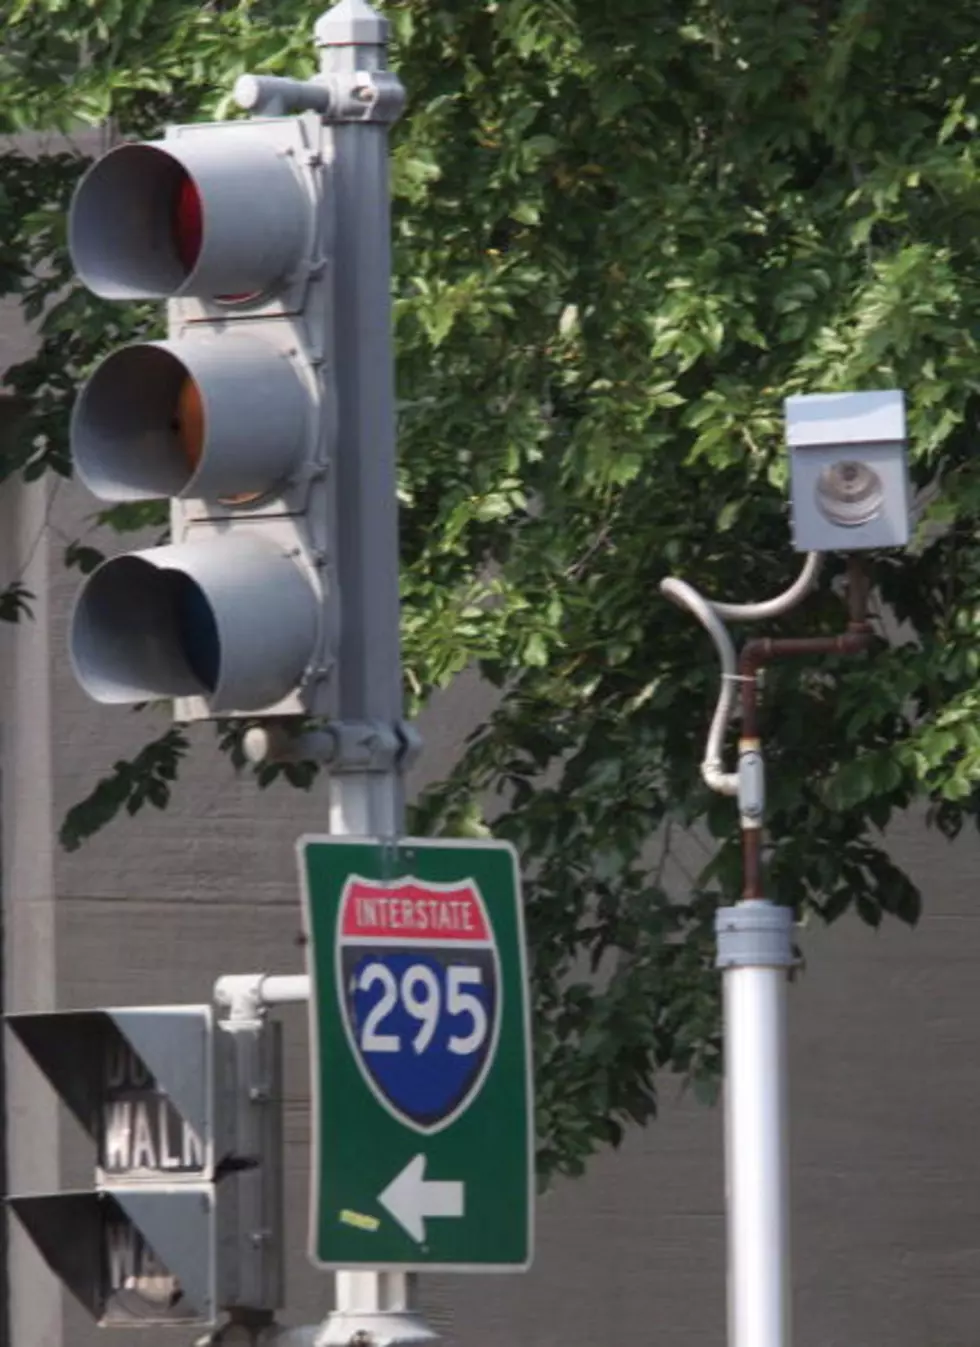 Illinois Lawmaker Wants to Restrict Police License Plate Readers